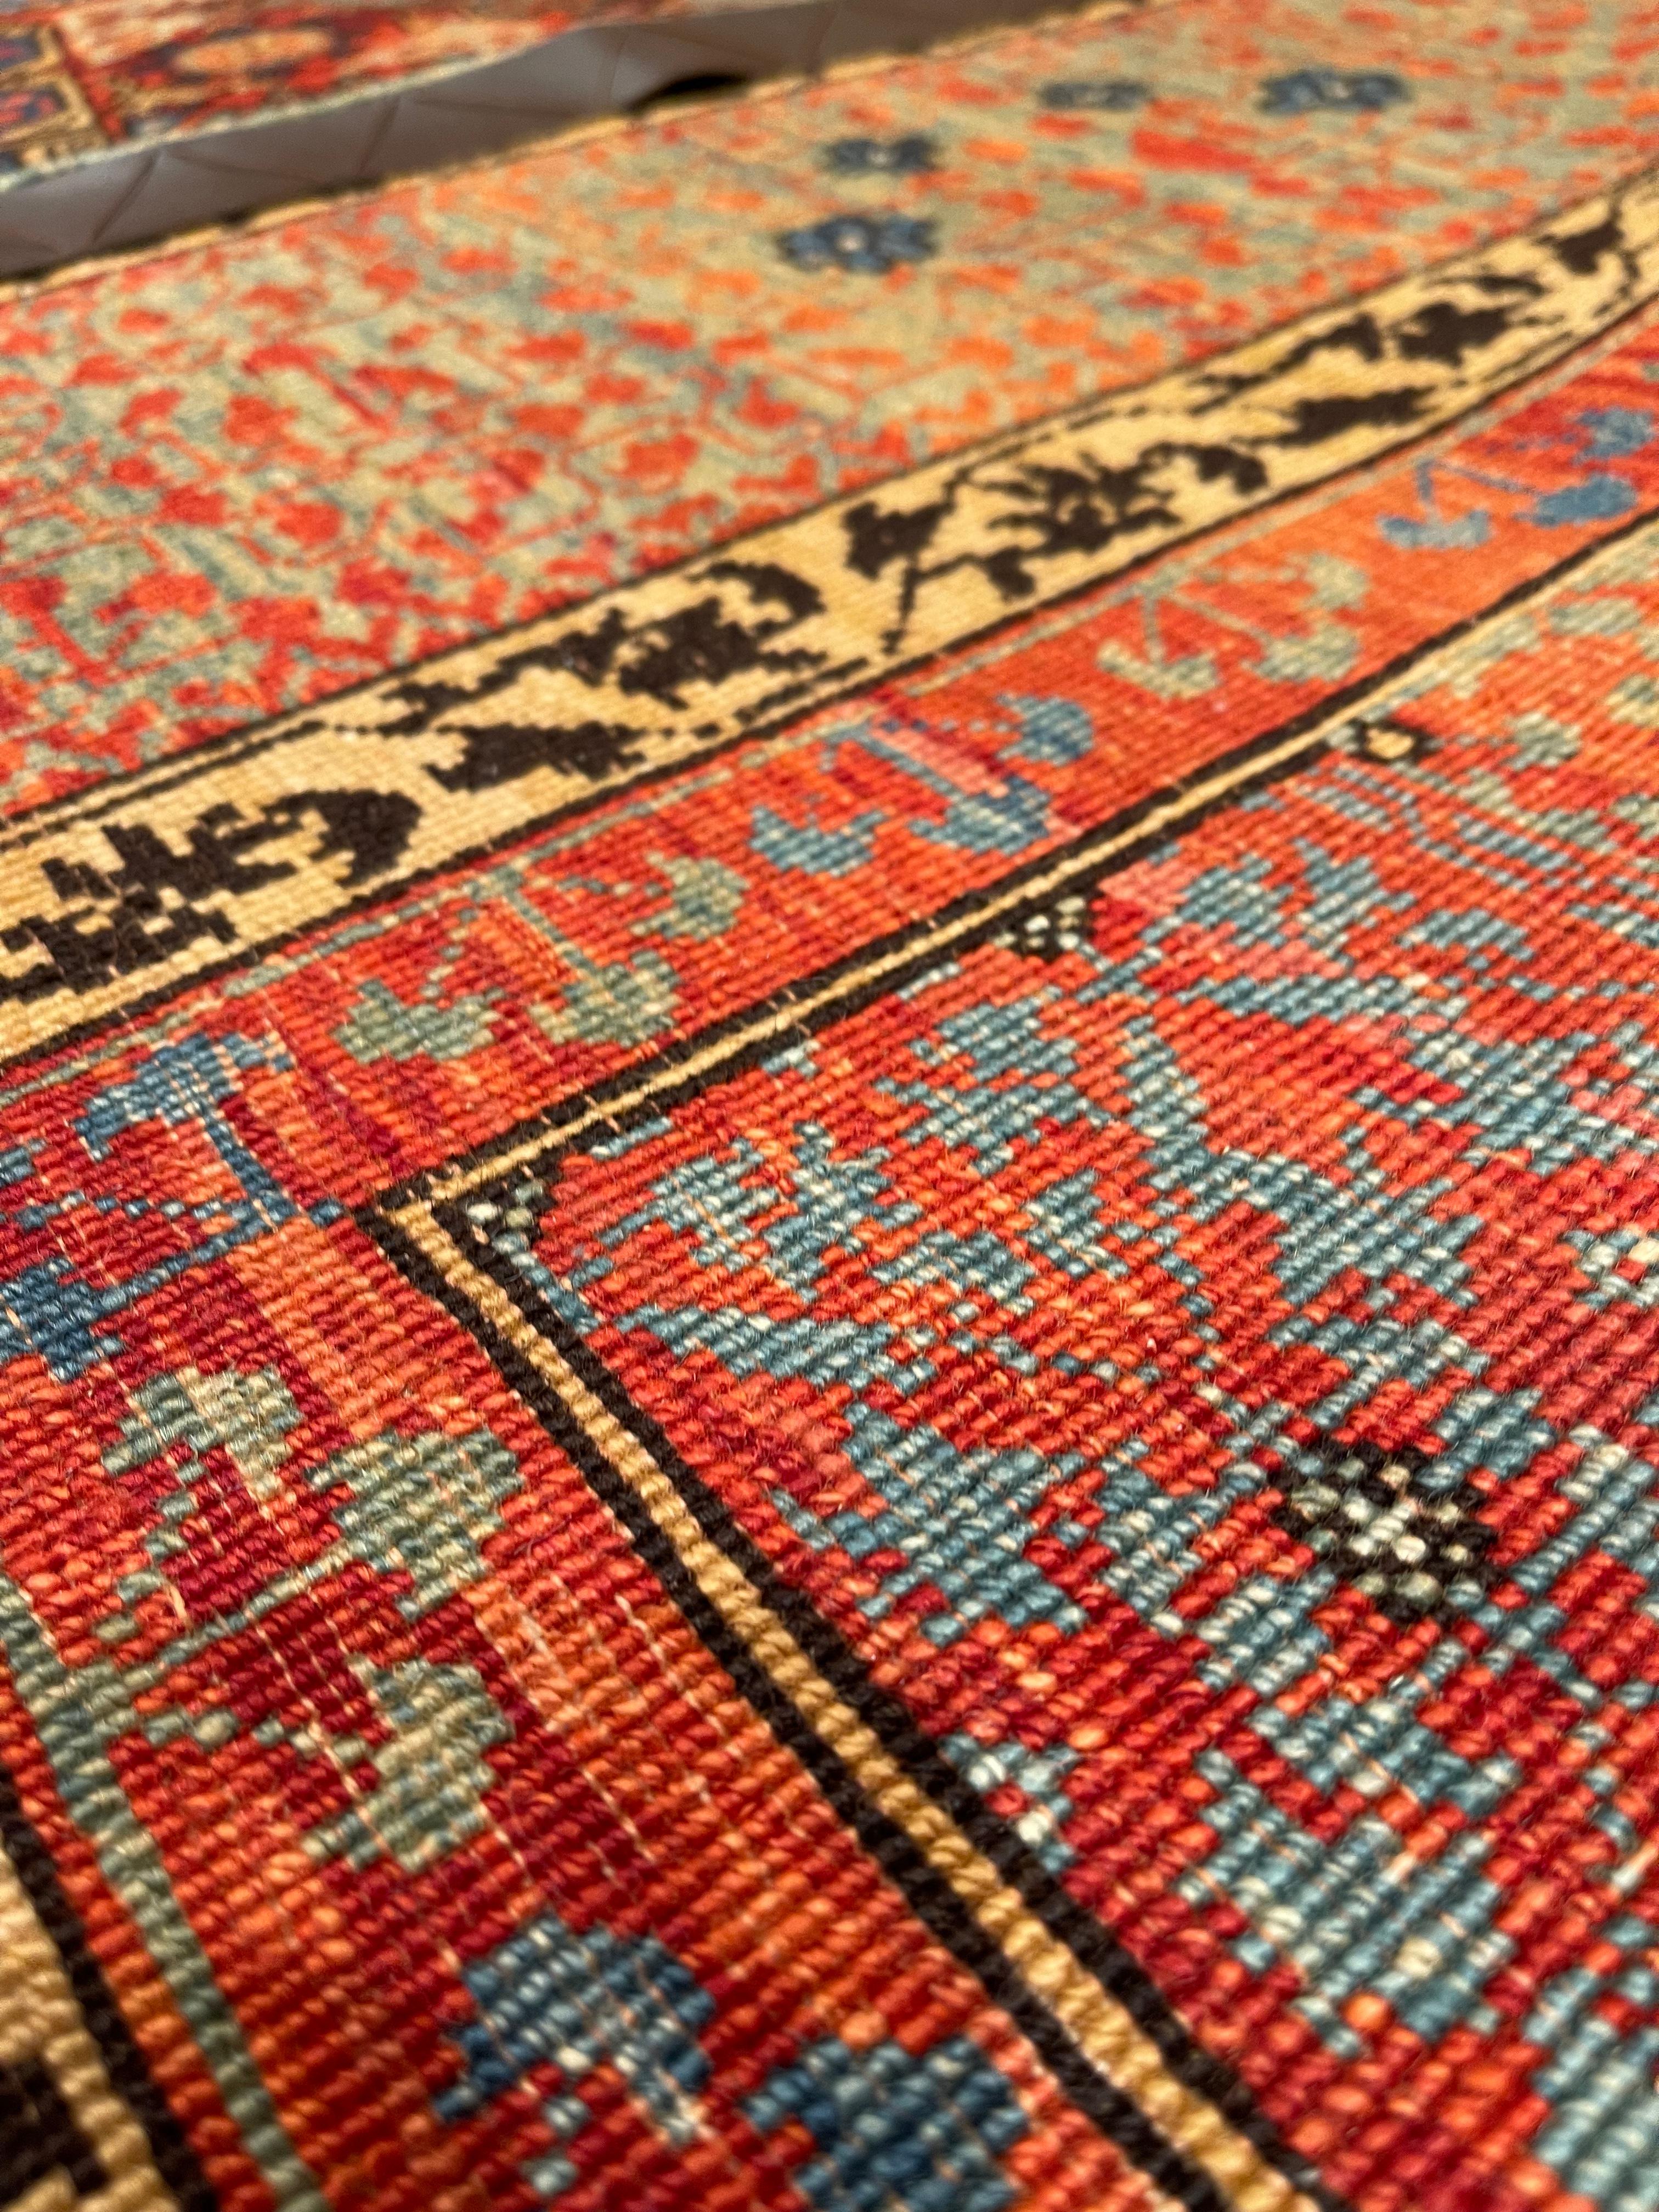 Ararat Rugs Mamluk Carpet with Central Star 16th Century Revival, Natural Dyed For Sale 4